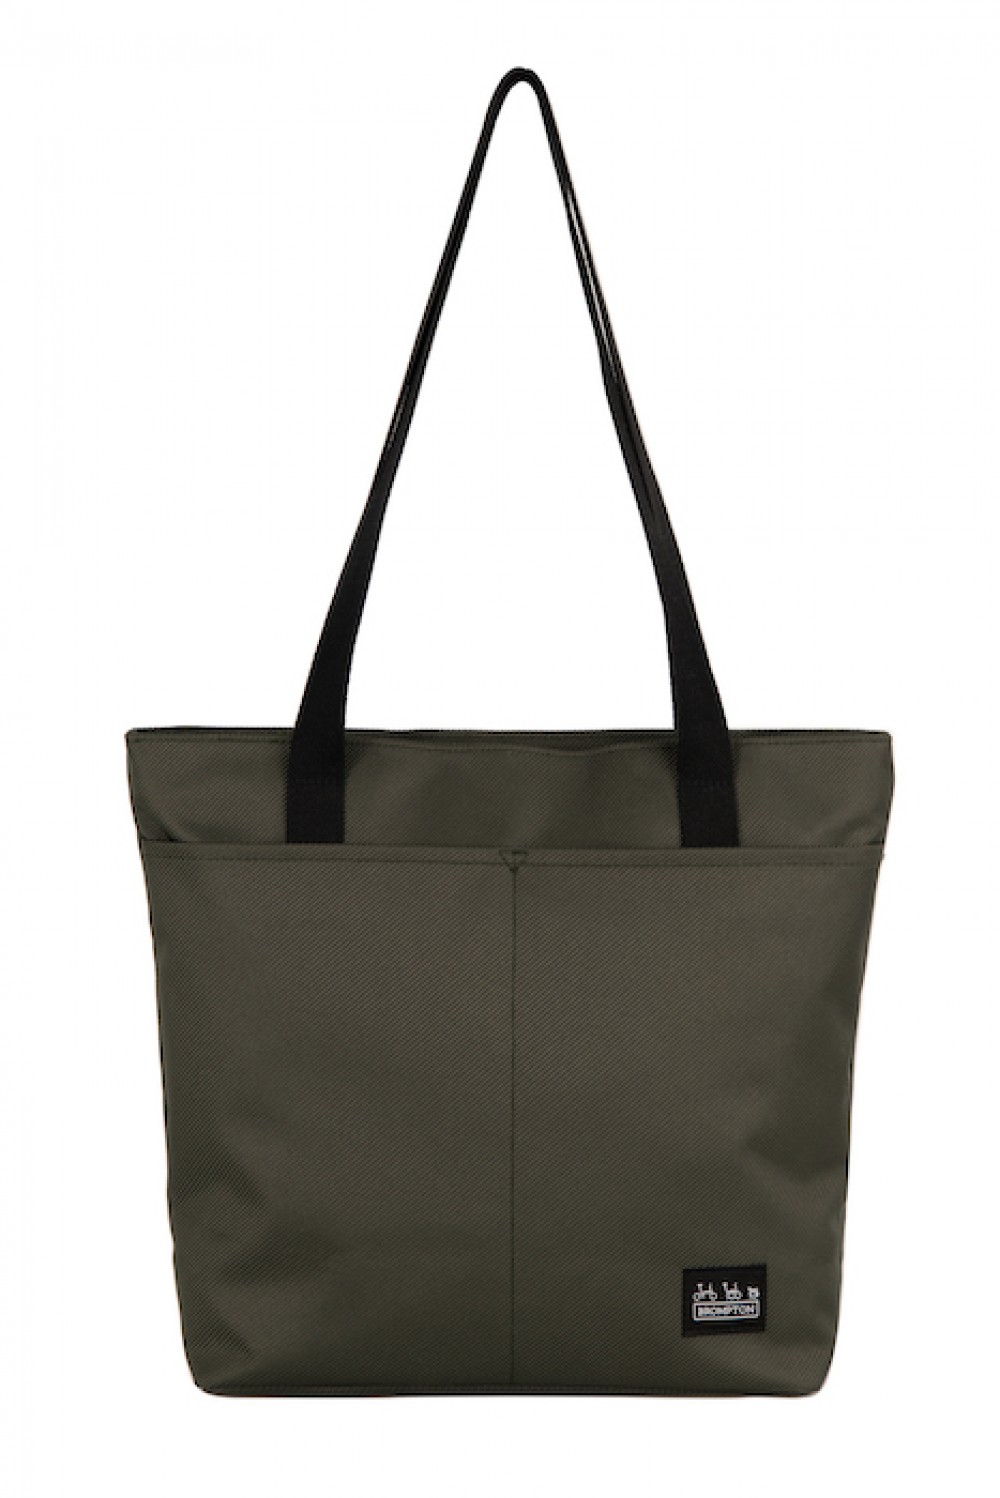 Brompton Borough Tote Bag Small in Olive |On Your Bike | London ...